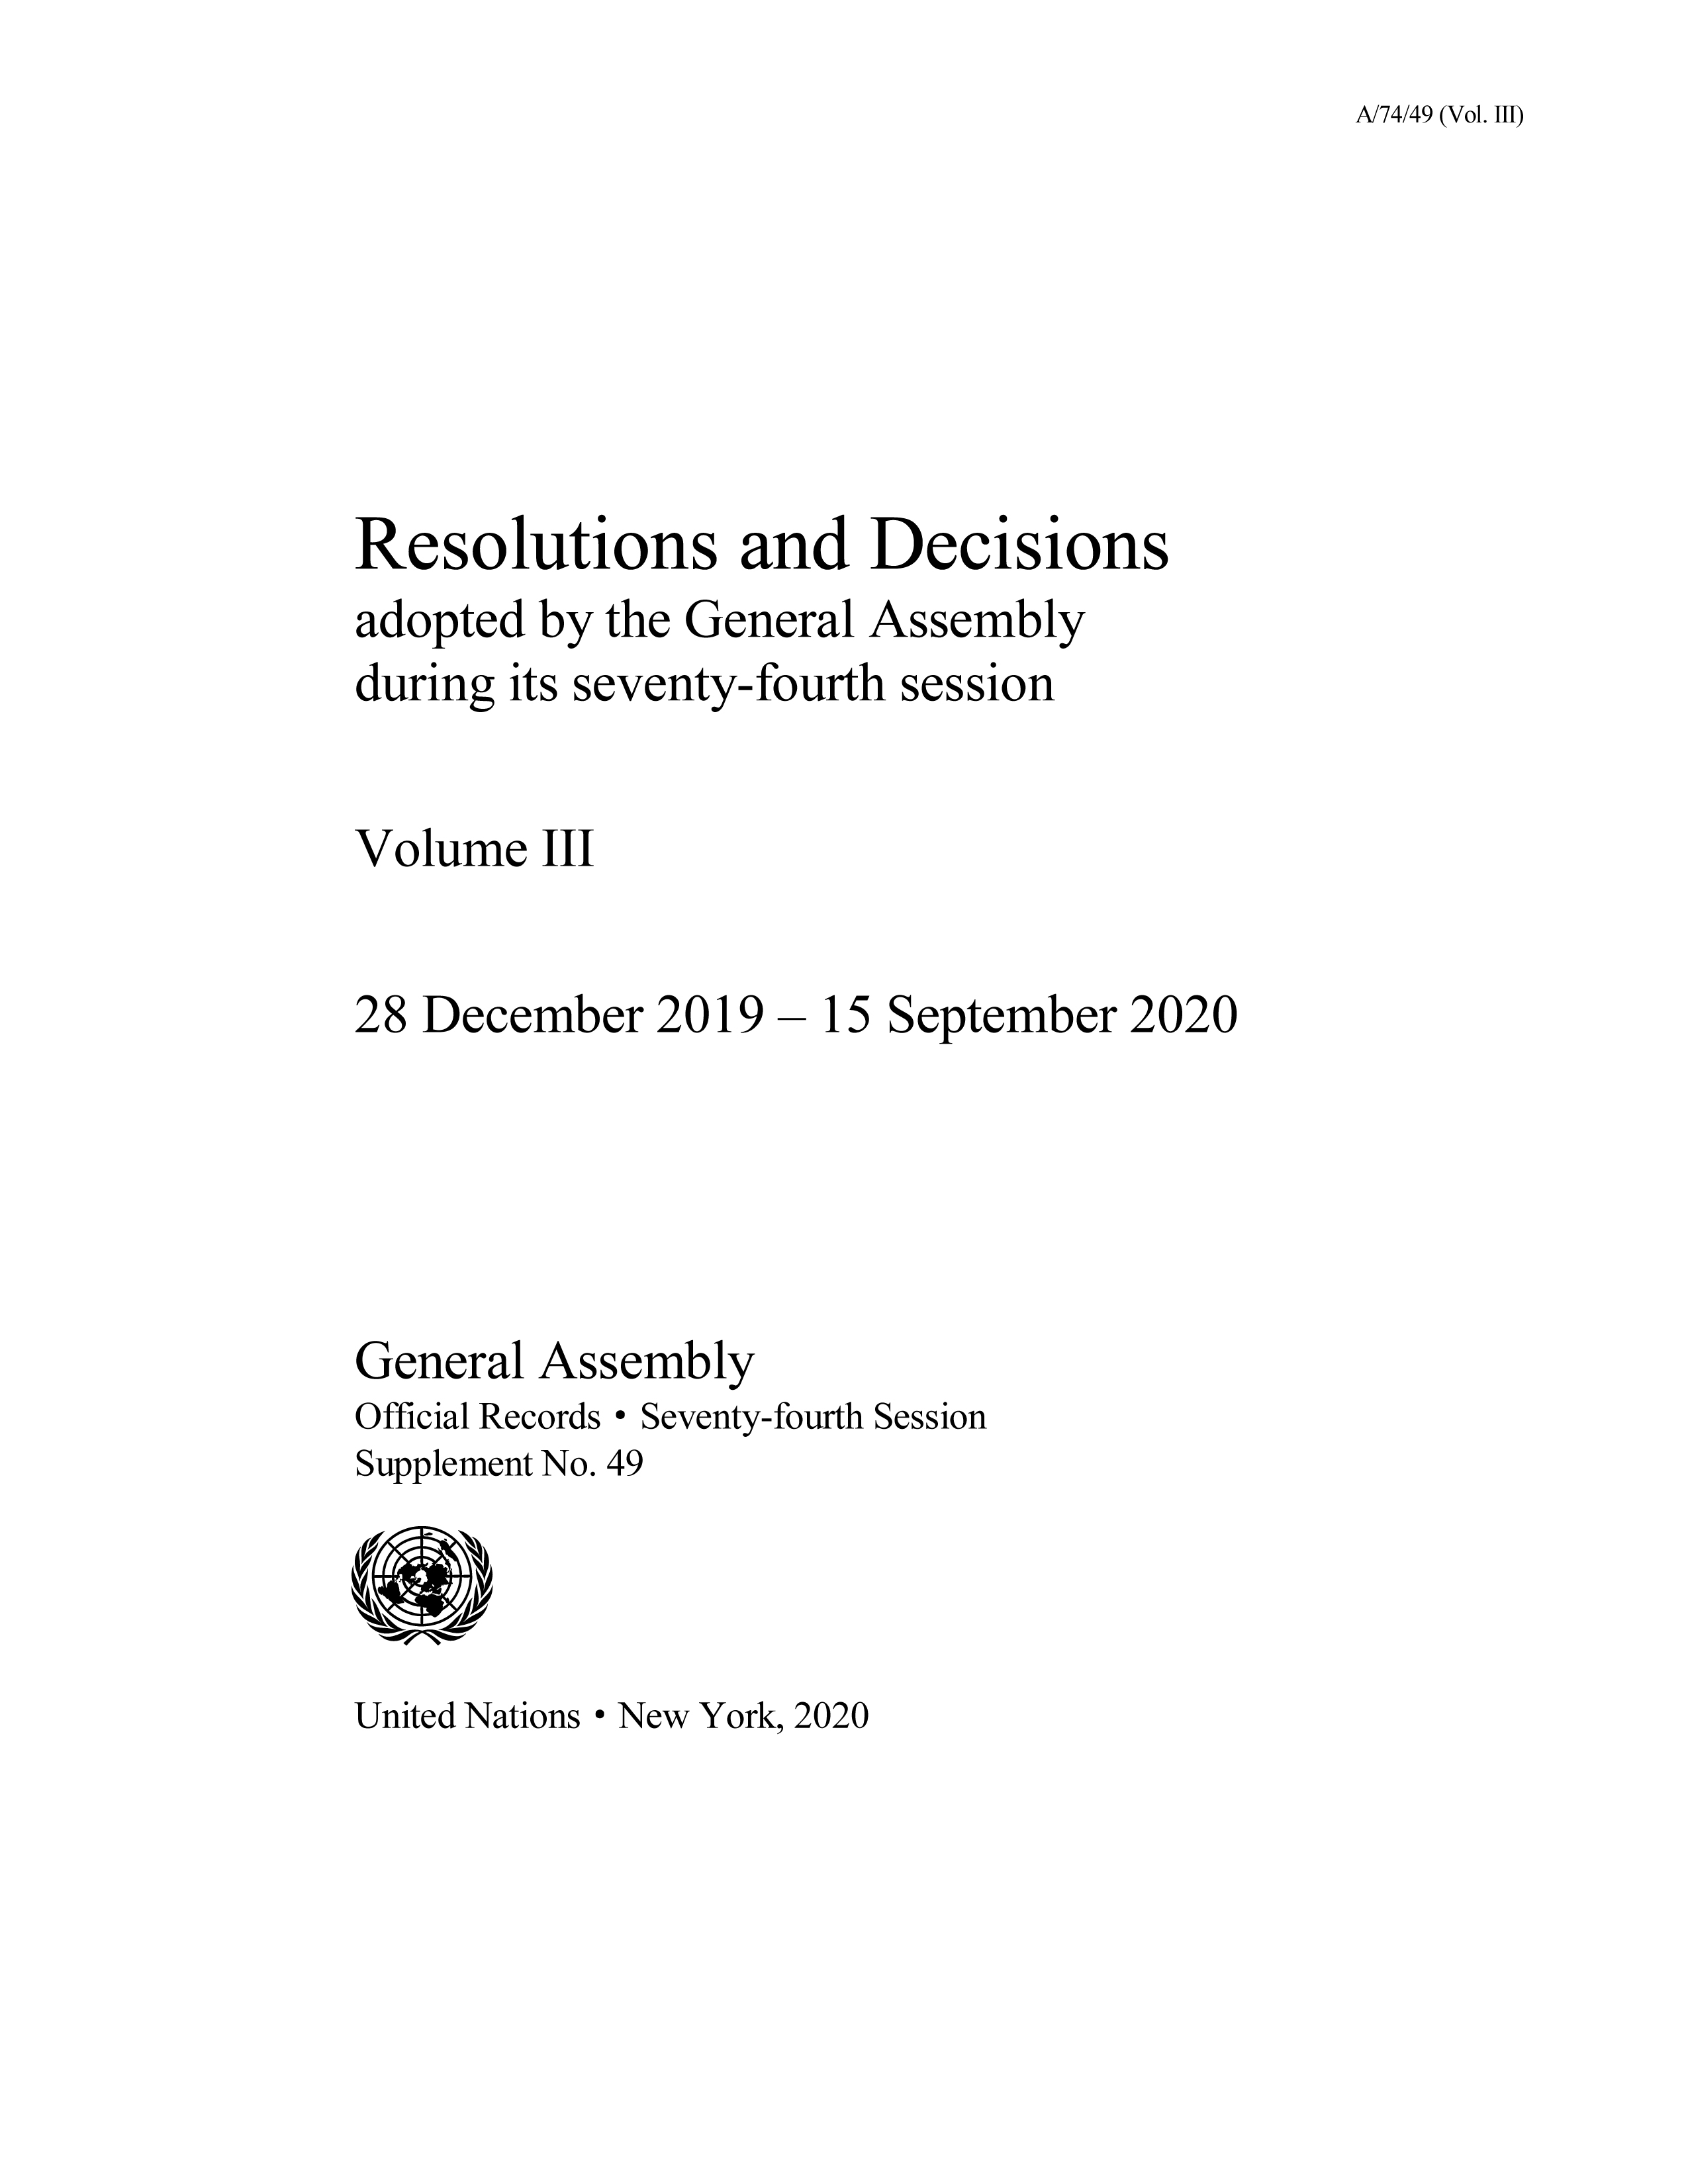 image of Resolutions and Decisions Adopted by the General Assembly During Its Seventy-Fourth Session